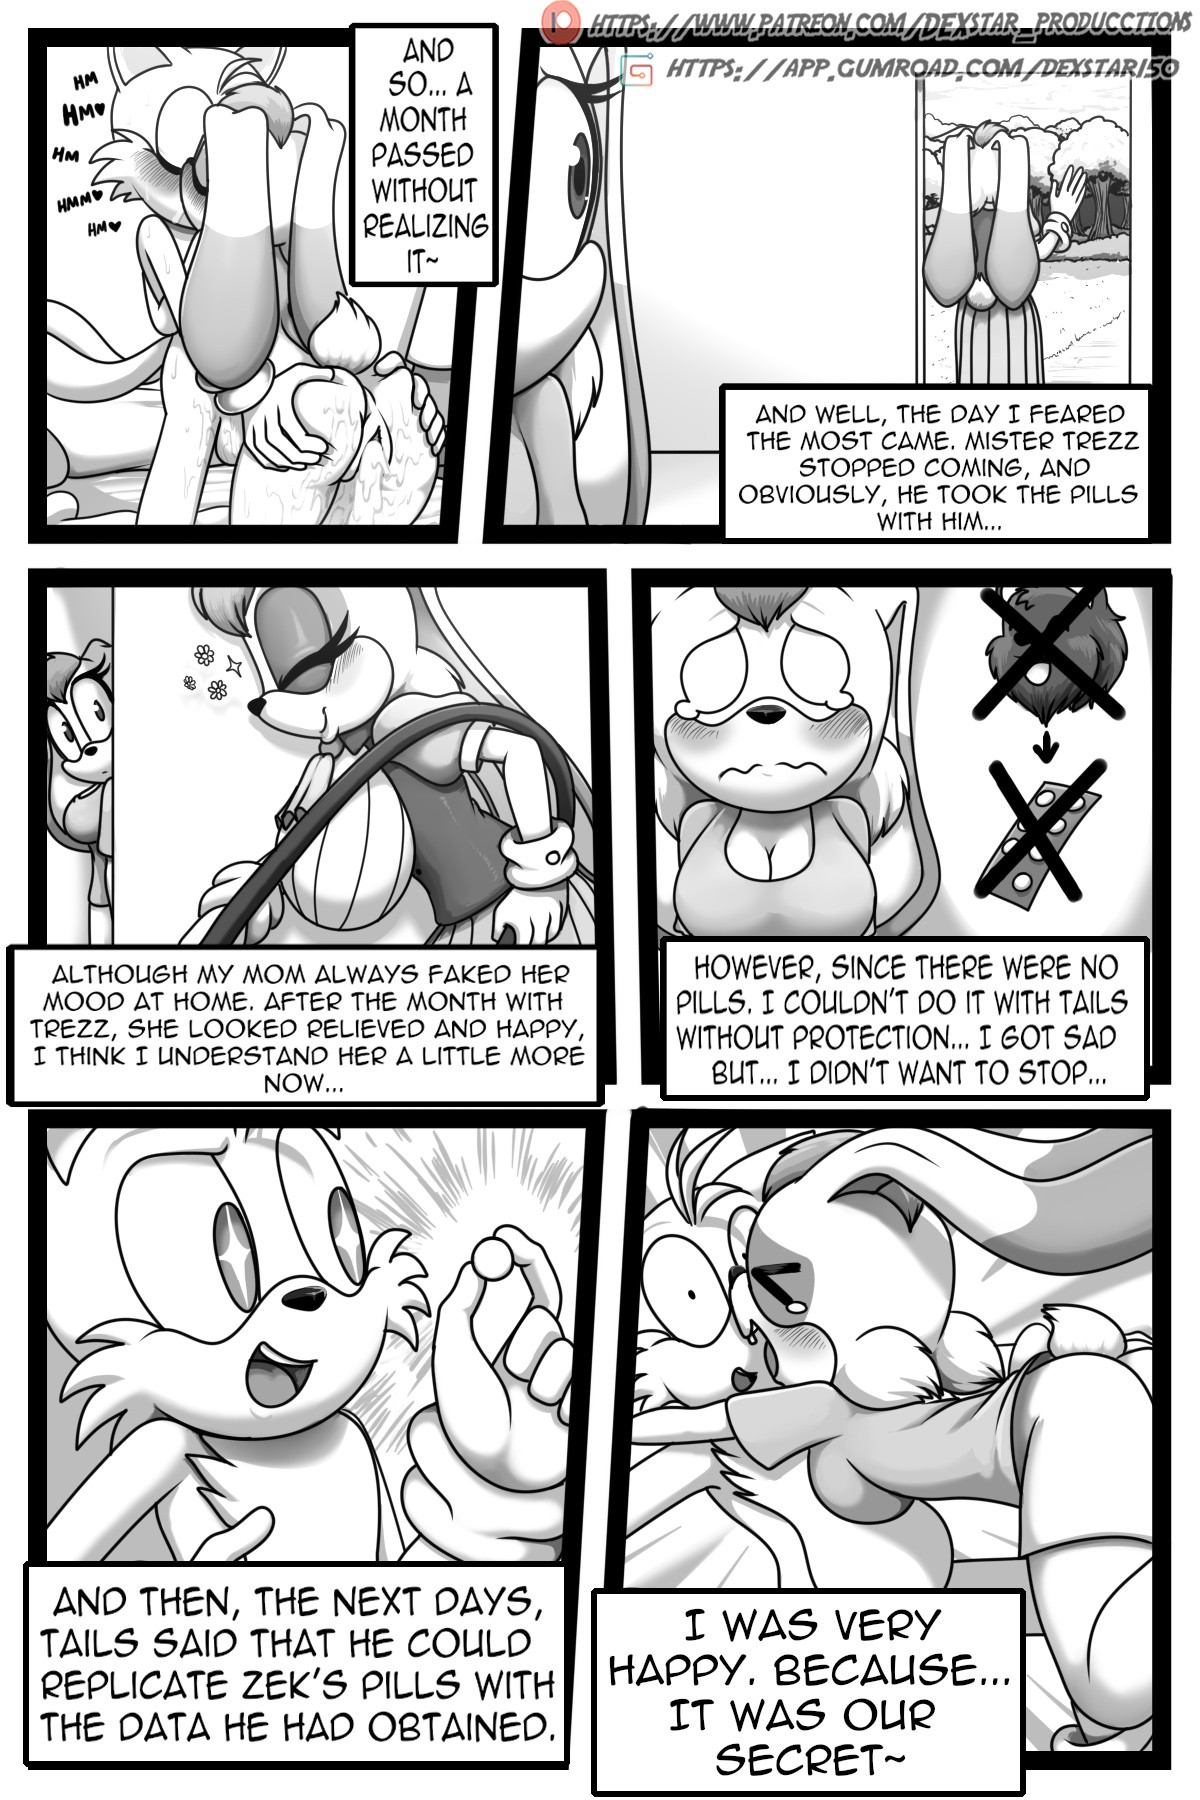 Please Fuck Me: Cream x Tail - Extra Story! porn comic picture 48